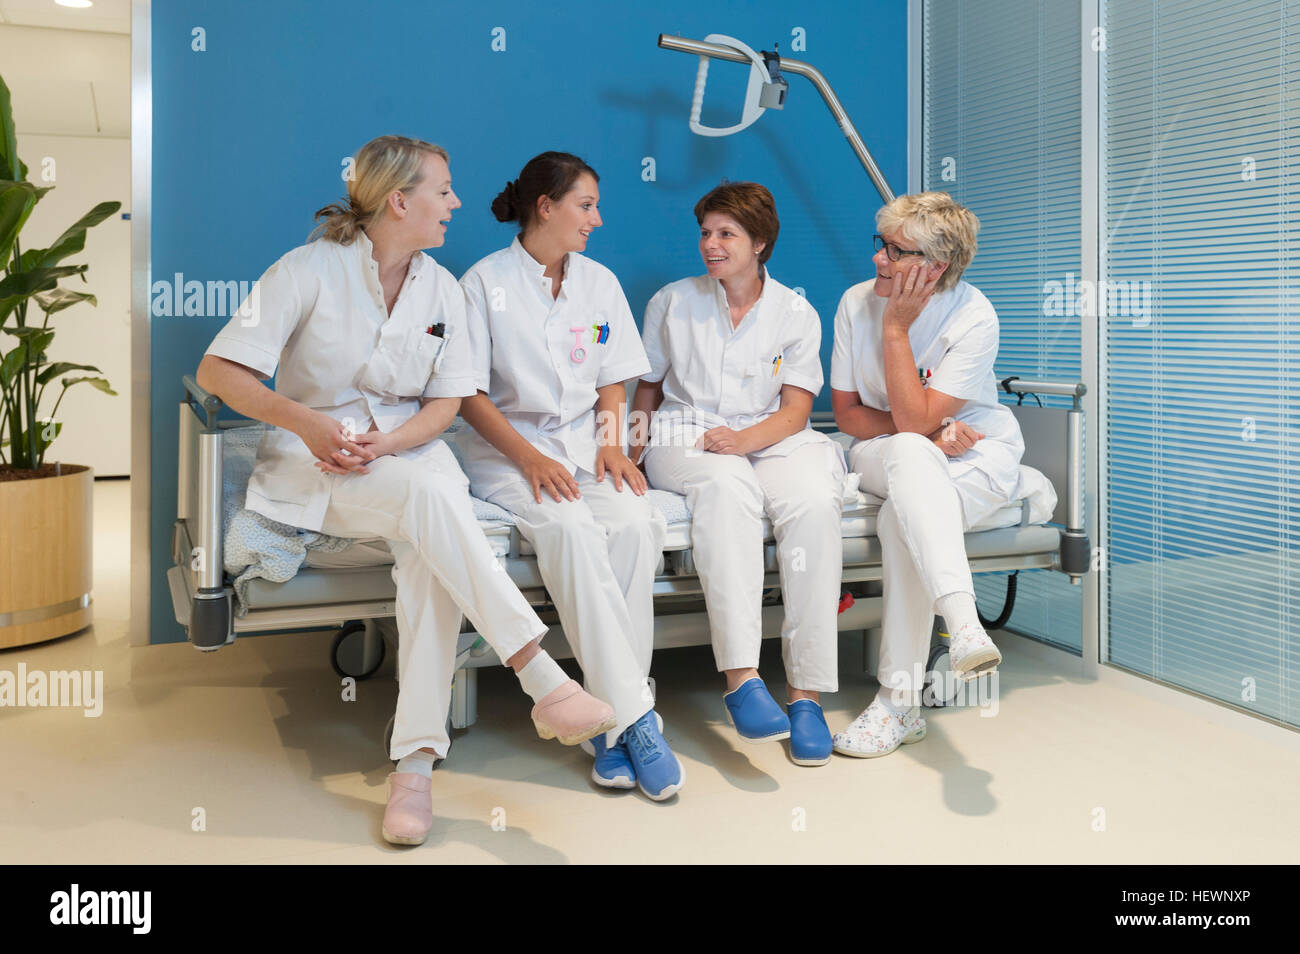 Nurses sitting side by side on bench in hospital, chatting Stock Photo